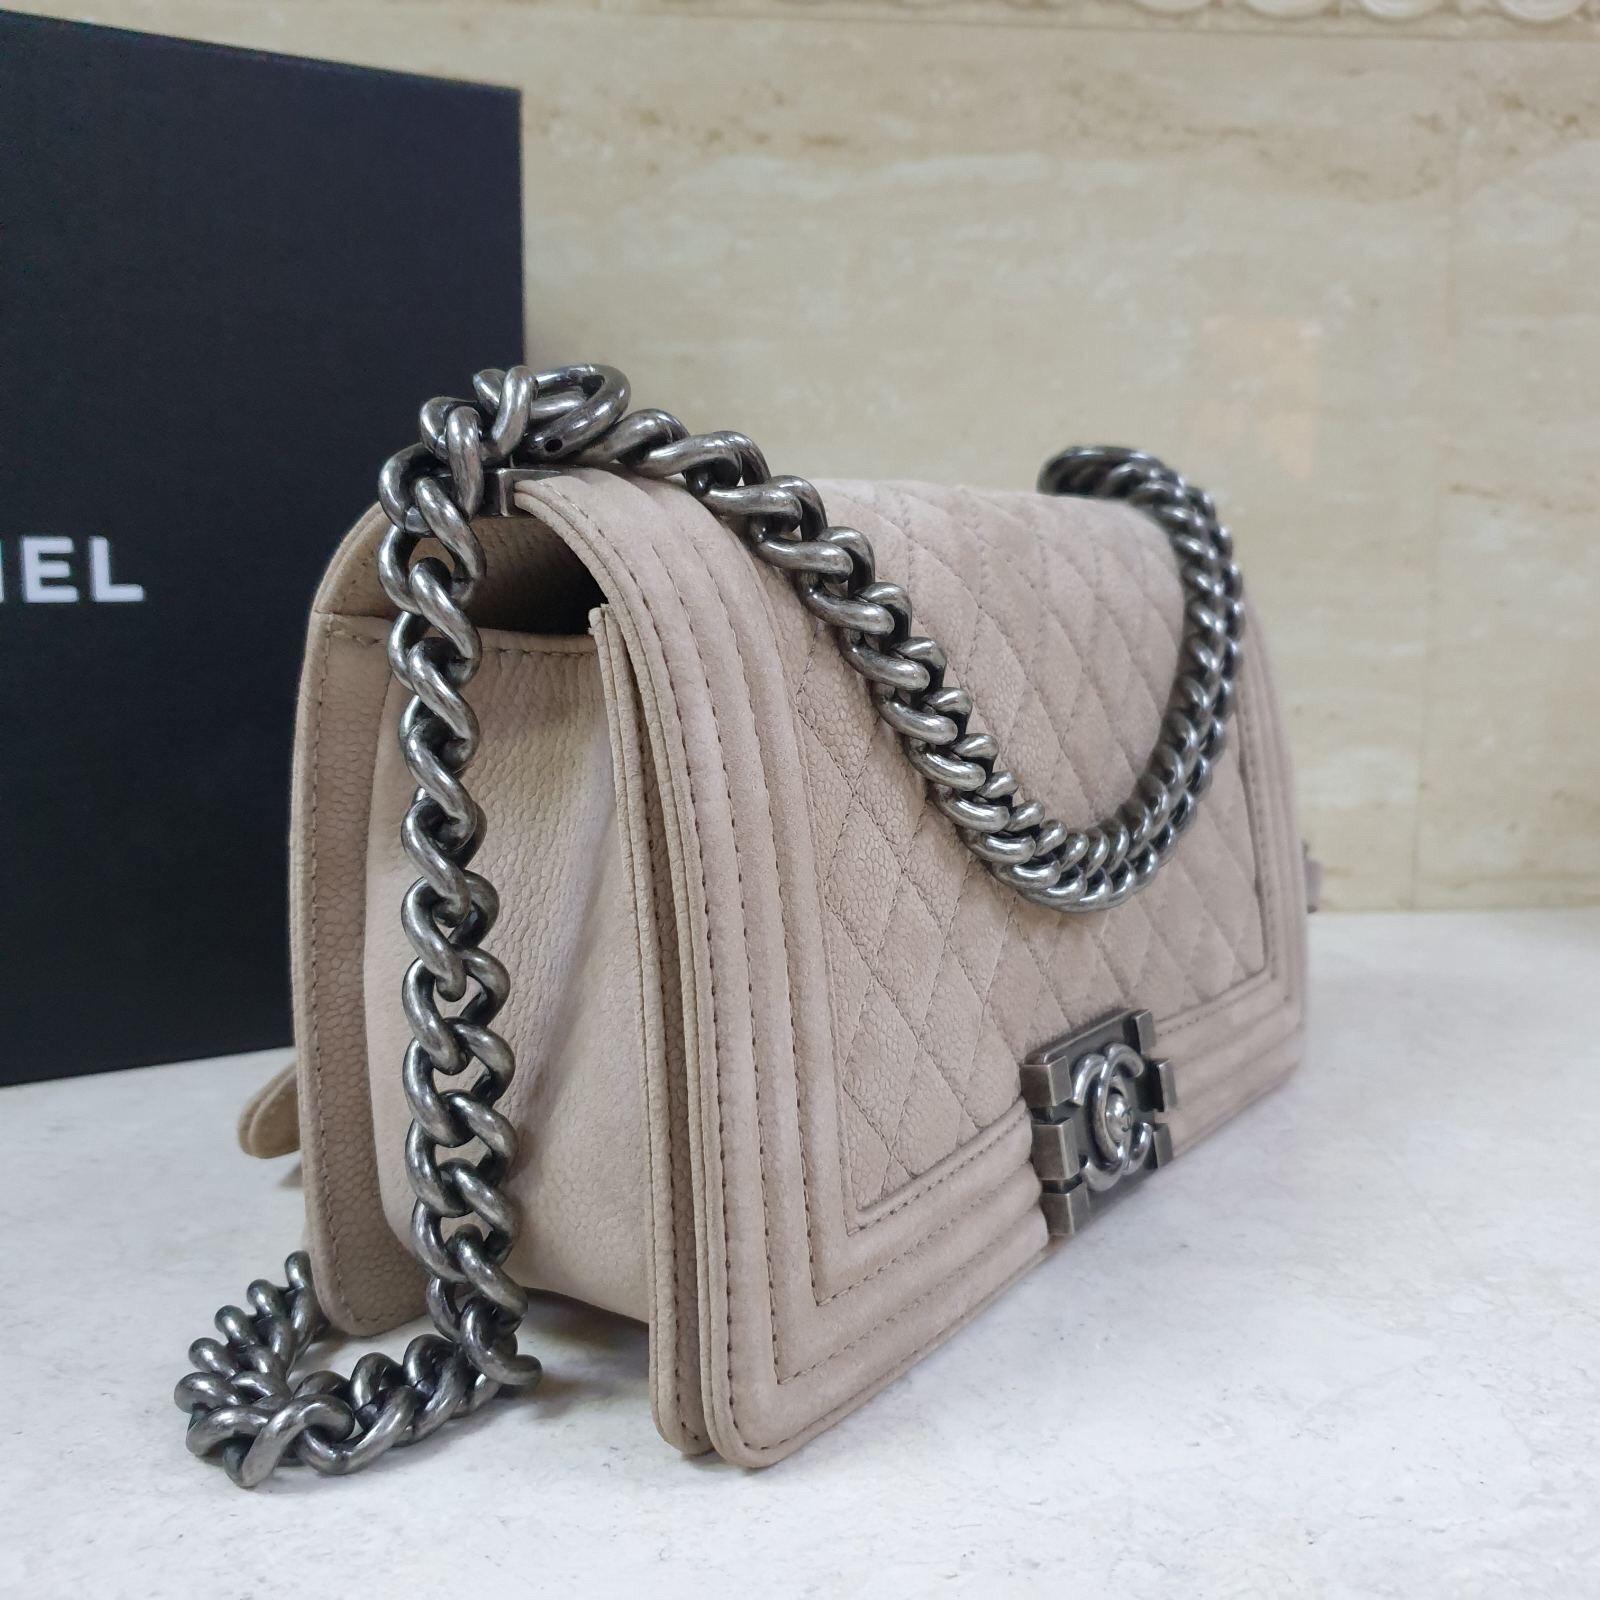 Oneof a kind and very rare Chanel boy in suede caviar. The leather feels like silk. 

The handbag comes dustbag only.

This is the medium size.

25*15 cm

Condition is very good.

They do not make this in suede caviar anymore.

For buyers from EU we